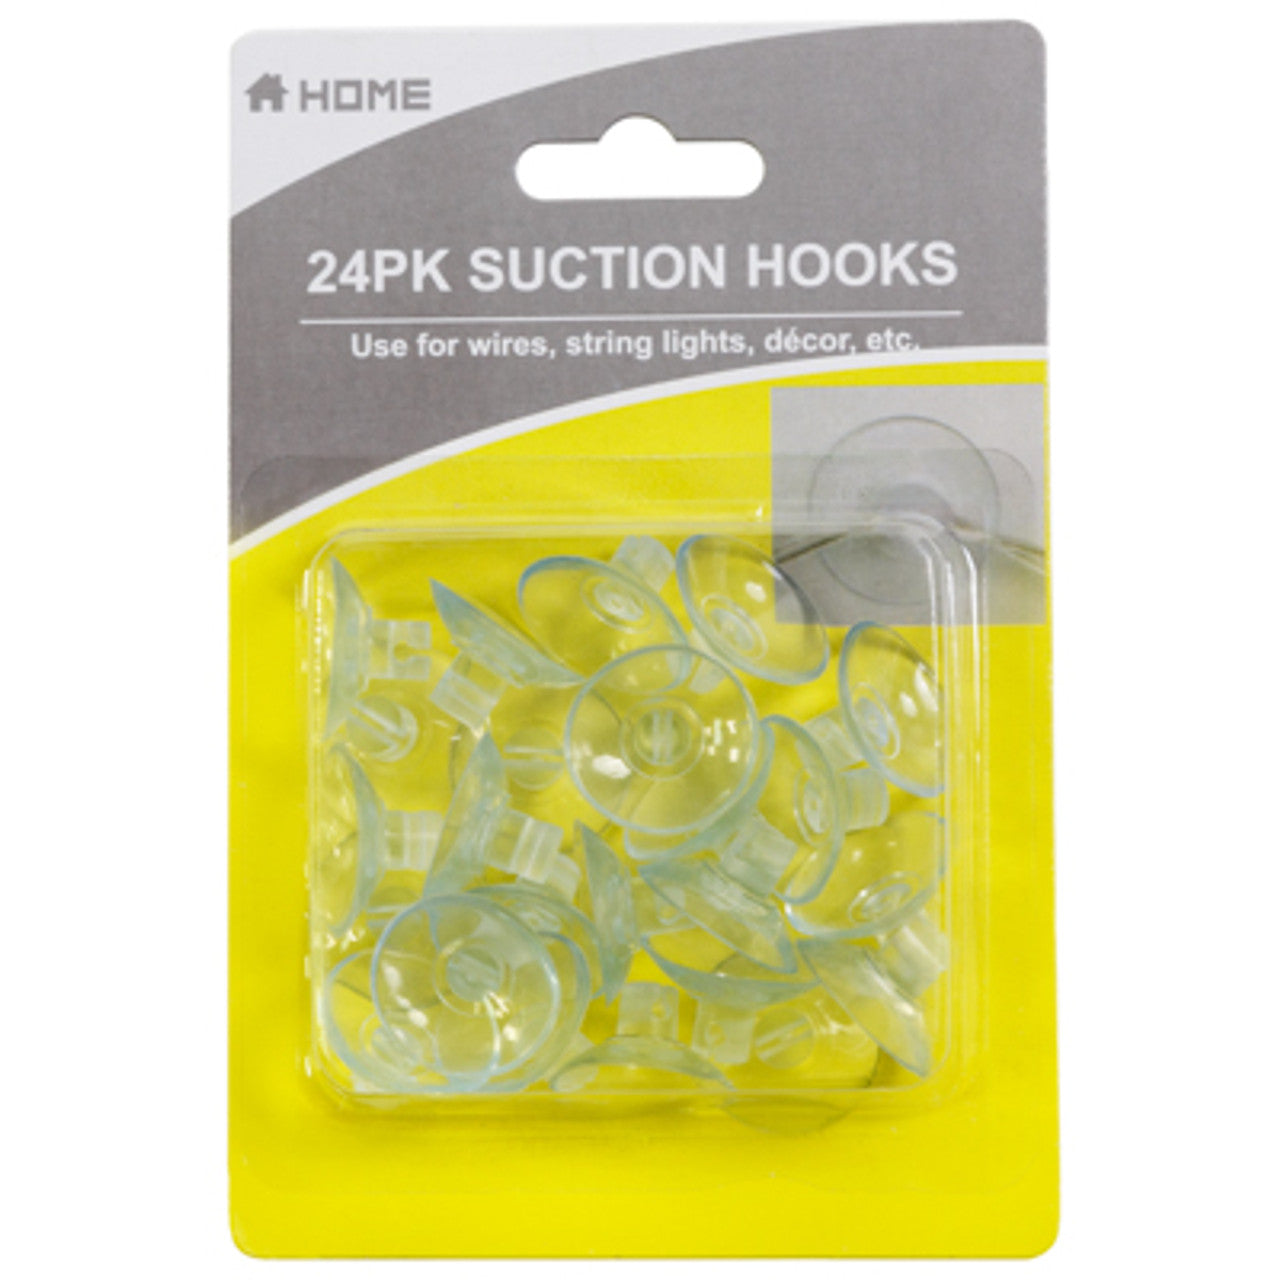 SUCTION CUP HOOKS FOR WIRES/LIGHTS 24PK